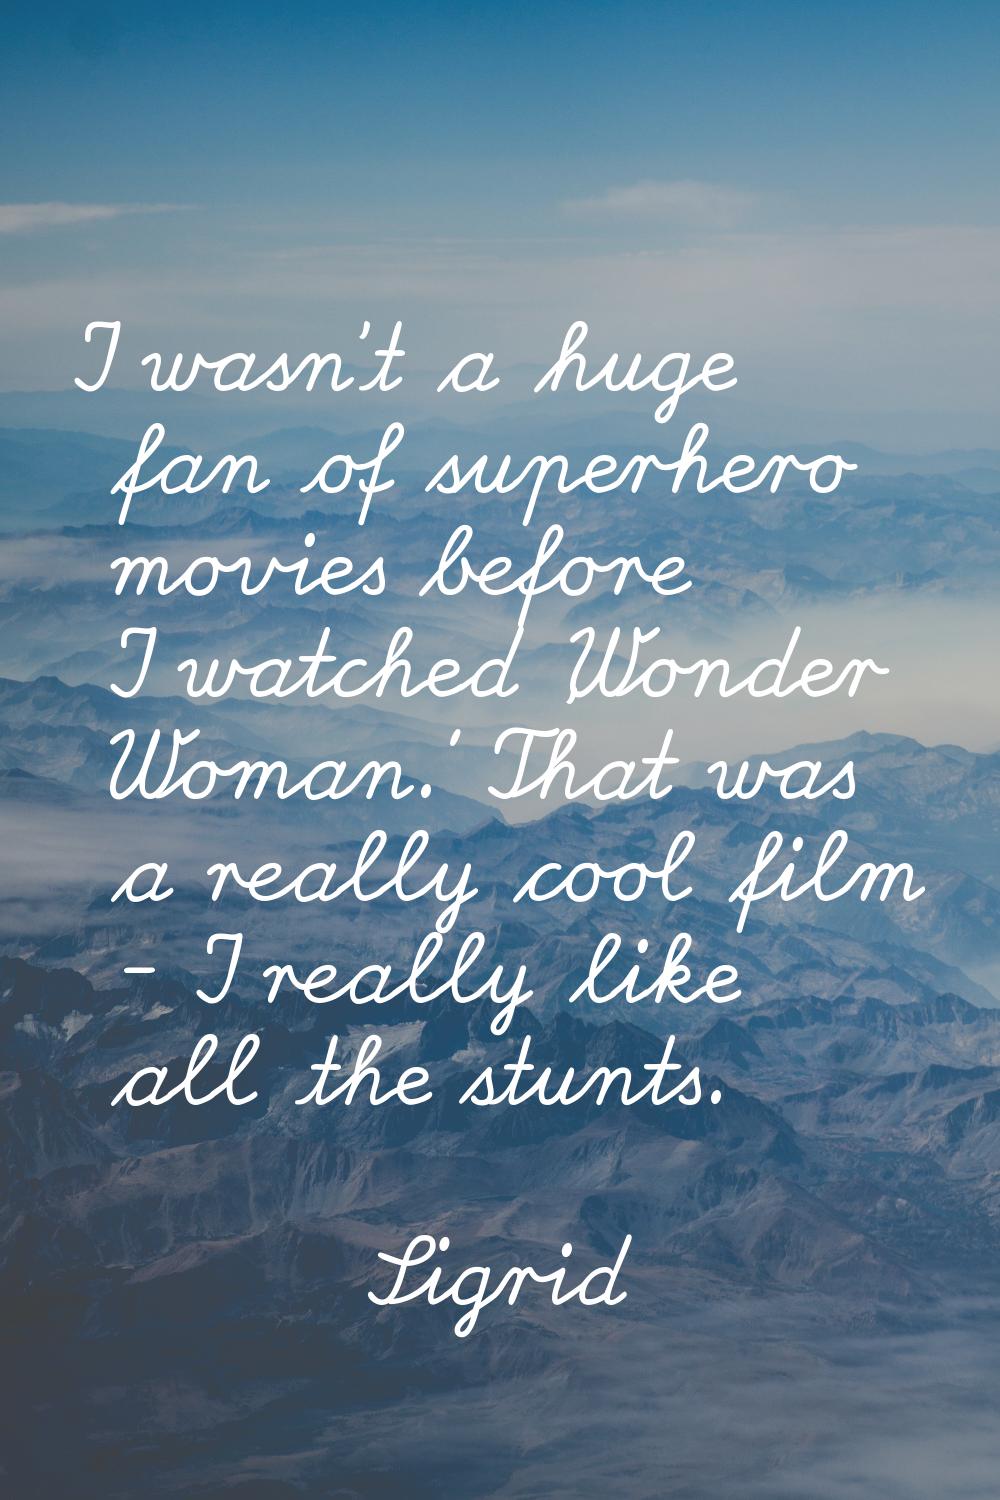 I wasn't a huge fan of superhero movies before I watched 'Wonder Woman.' That was a really cool fil